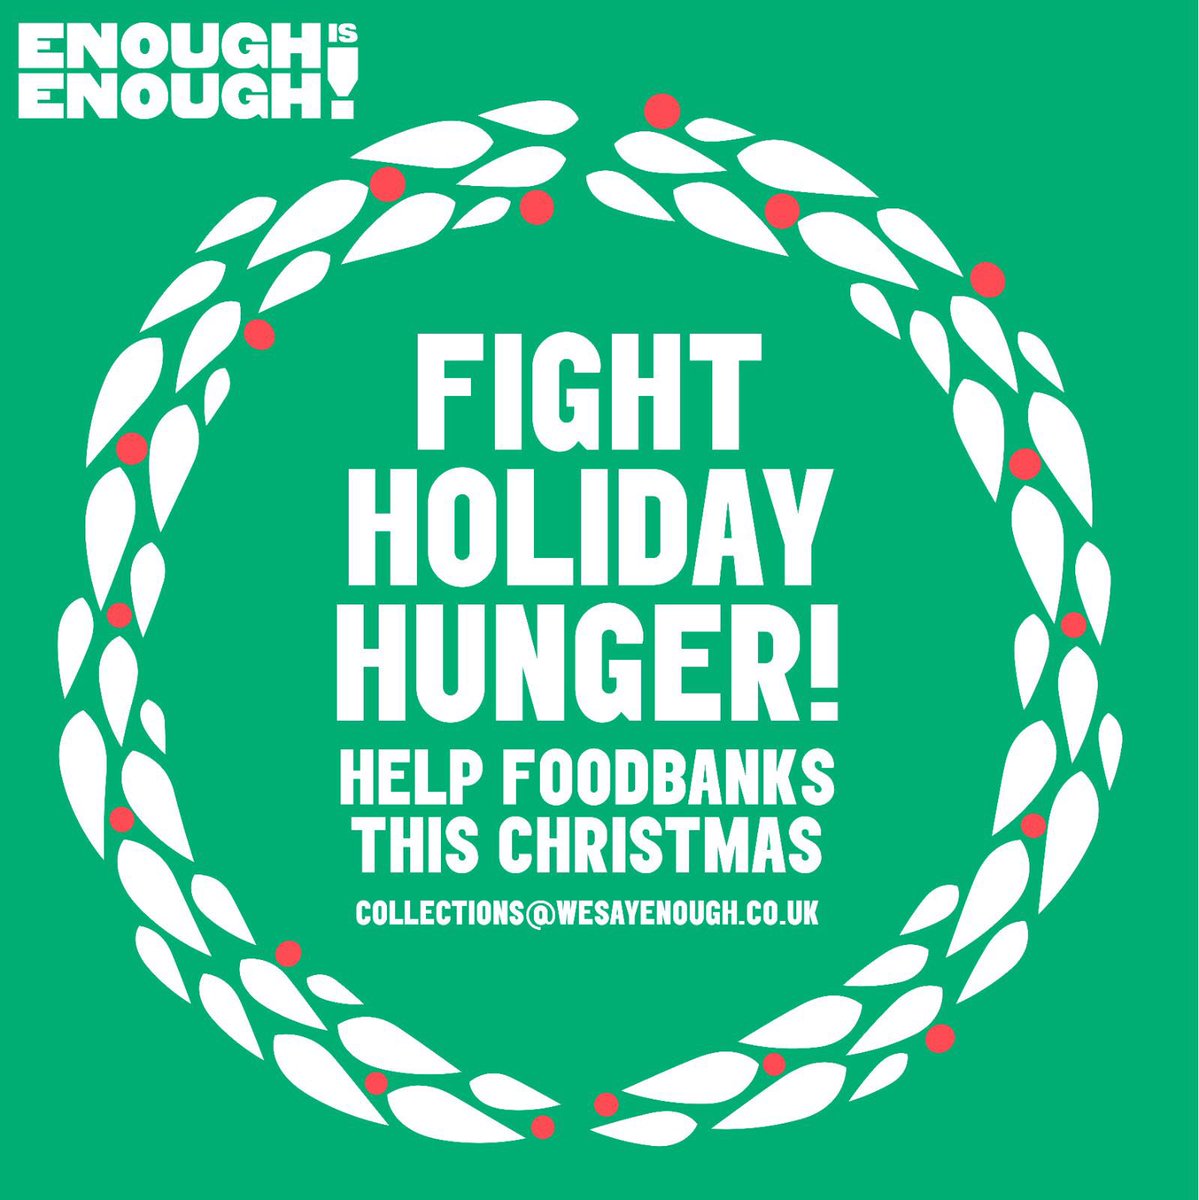 This Christmas, millions of kids face a holiday of hunger. But we’re fighting back. Enough is Enough wants to hear from community spaces, pubs, football clubs- anyone who can arrange a collection for a food bank. collections@wesayenough.co.uk Let’s #EndHolidayHunger